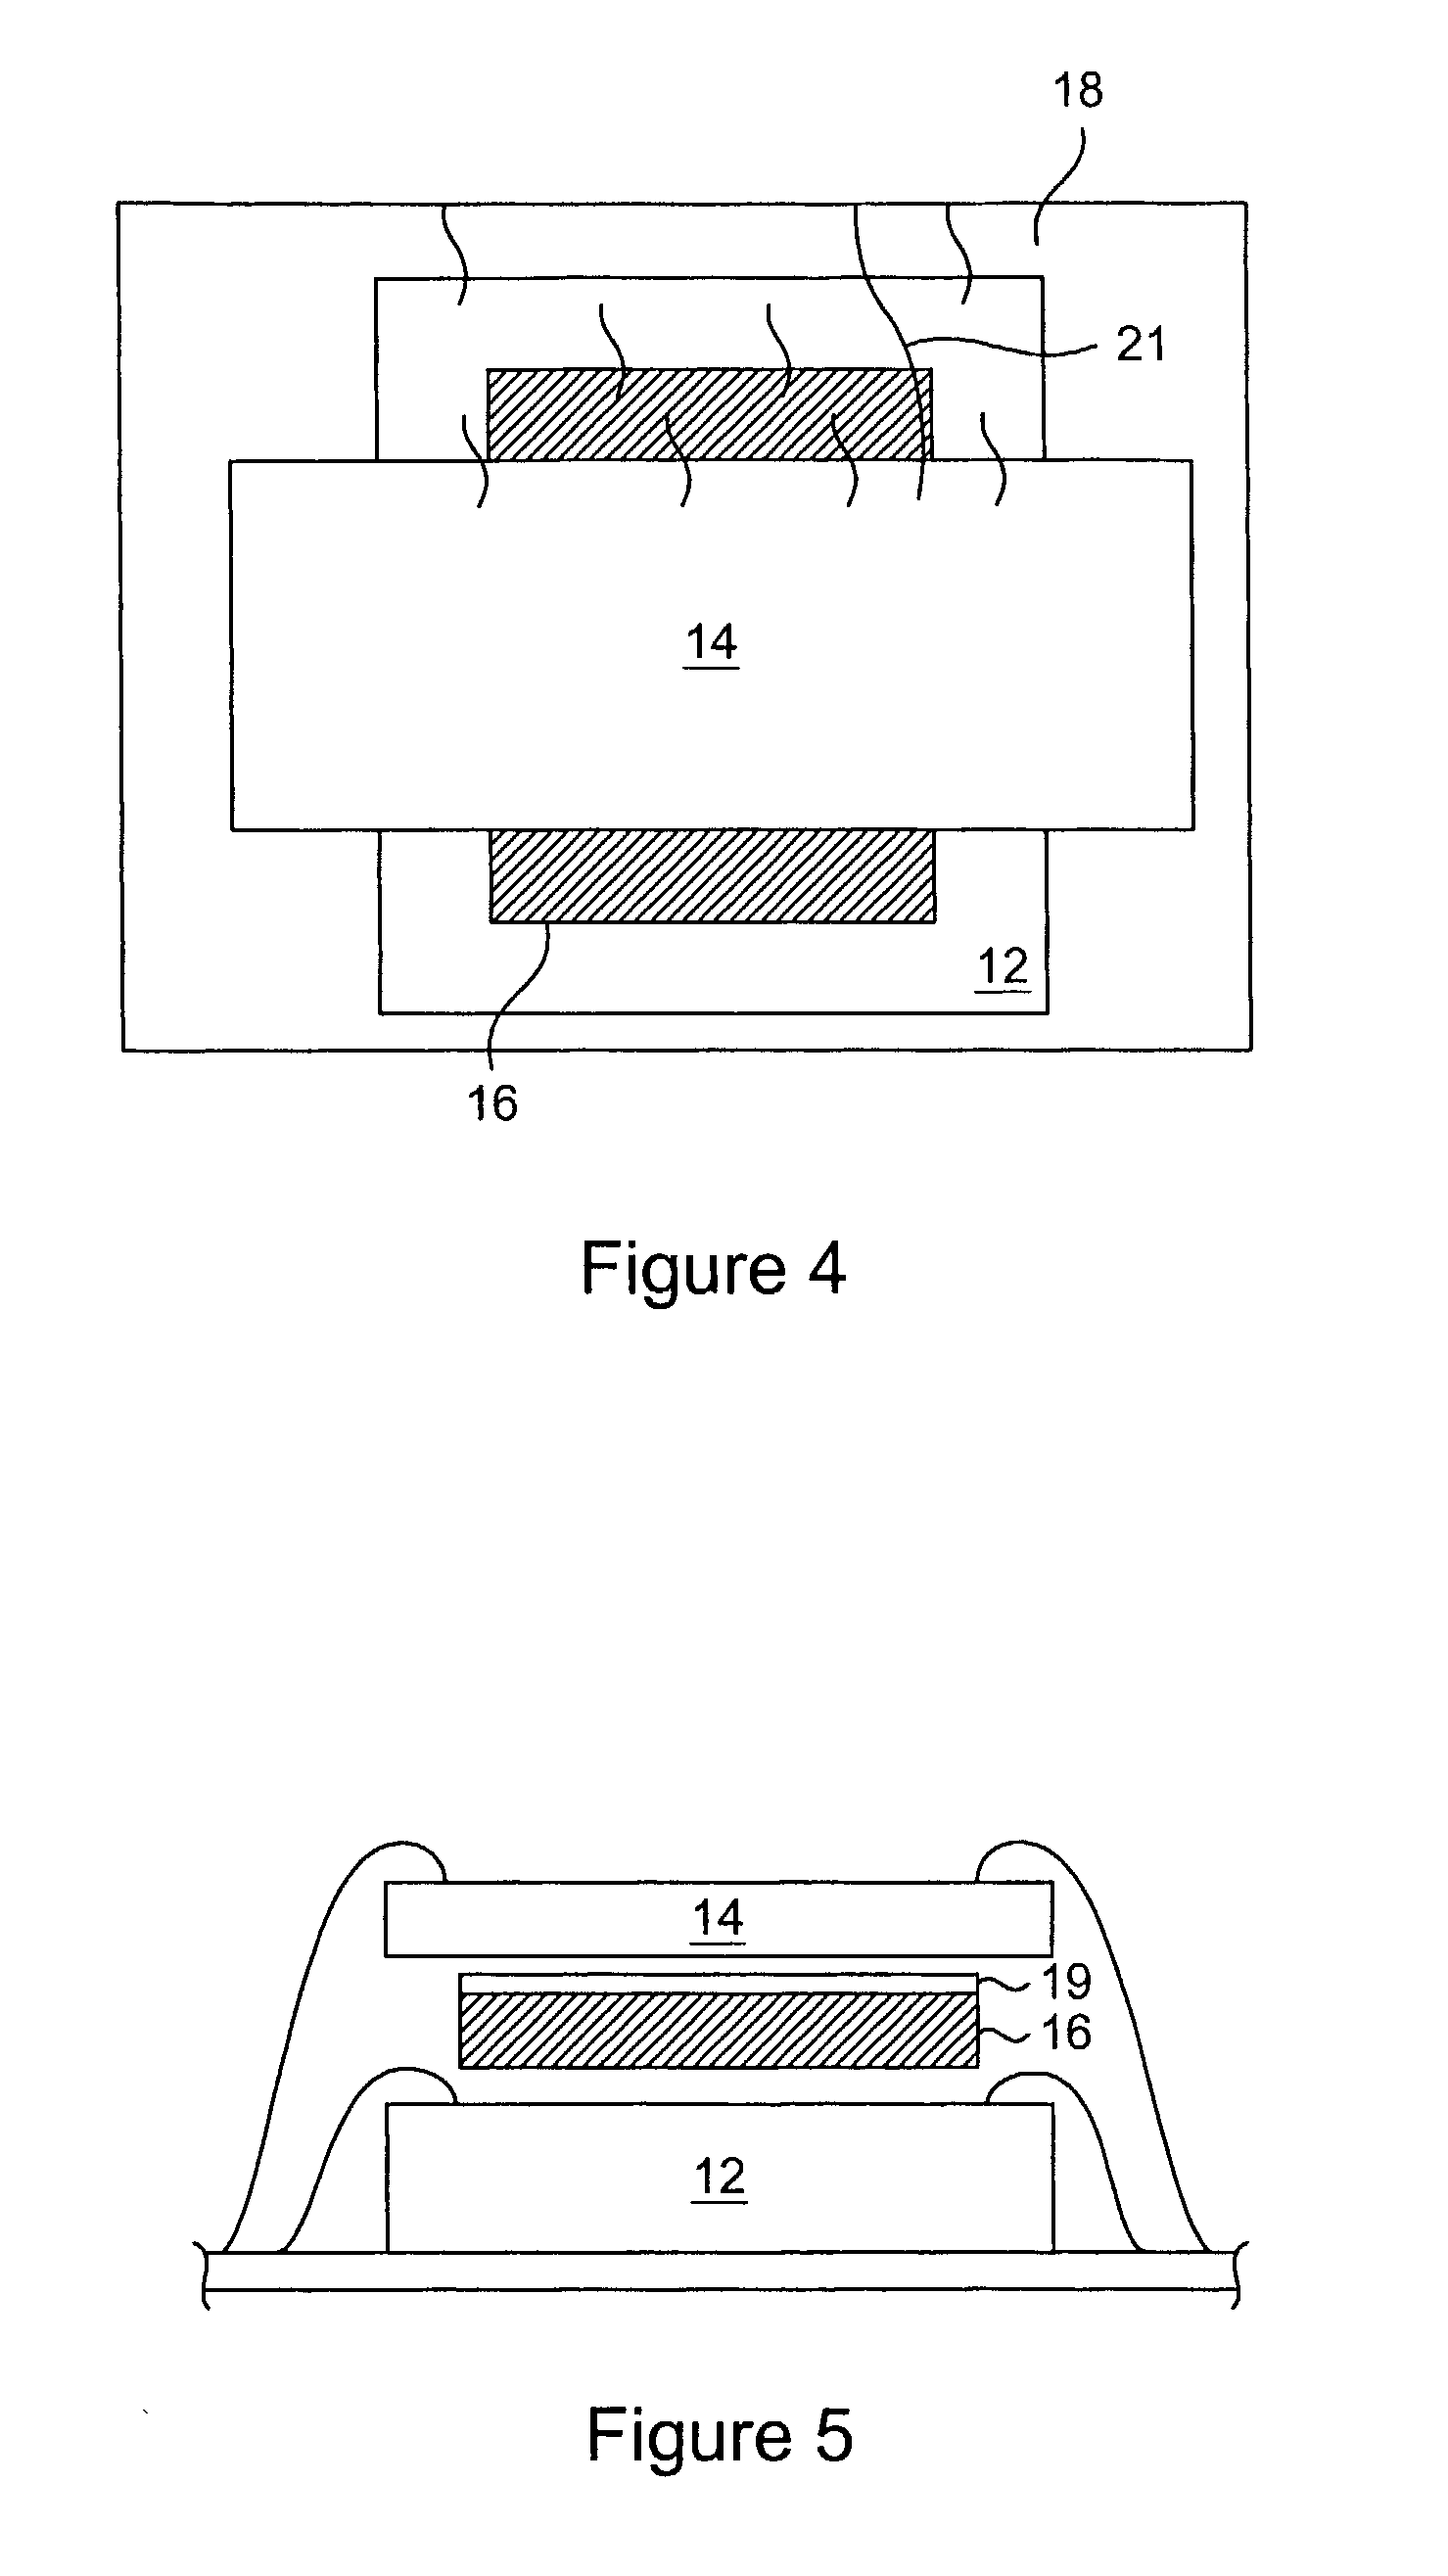 Spacer with passive components for use in multi-chip modules